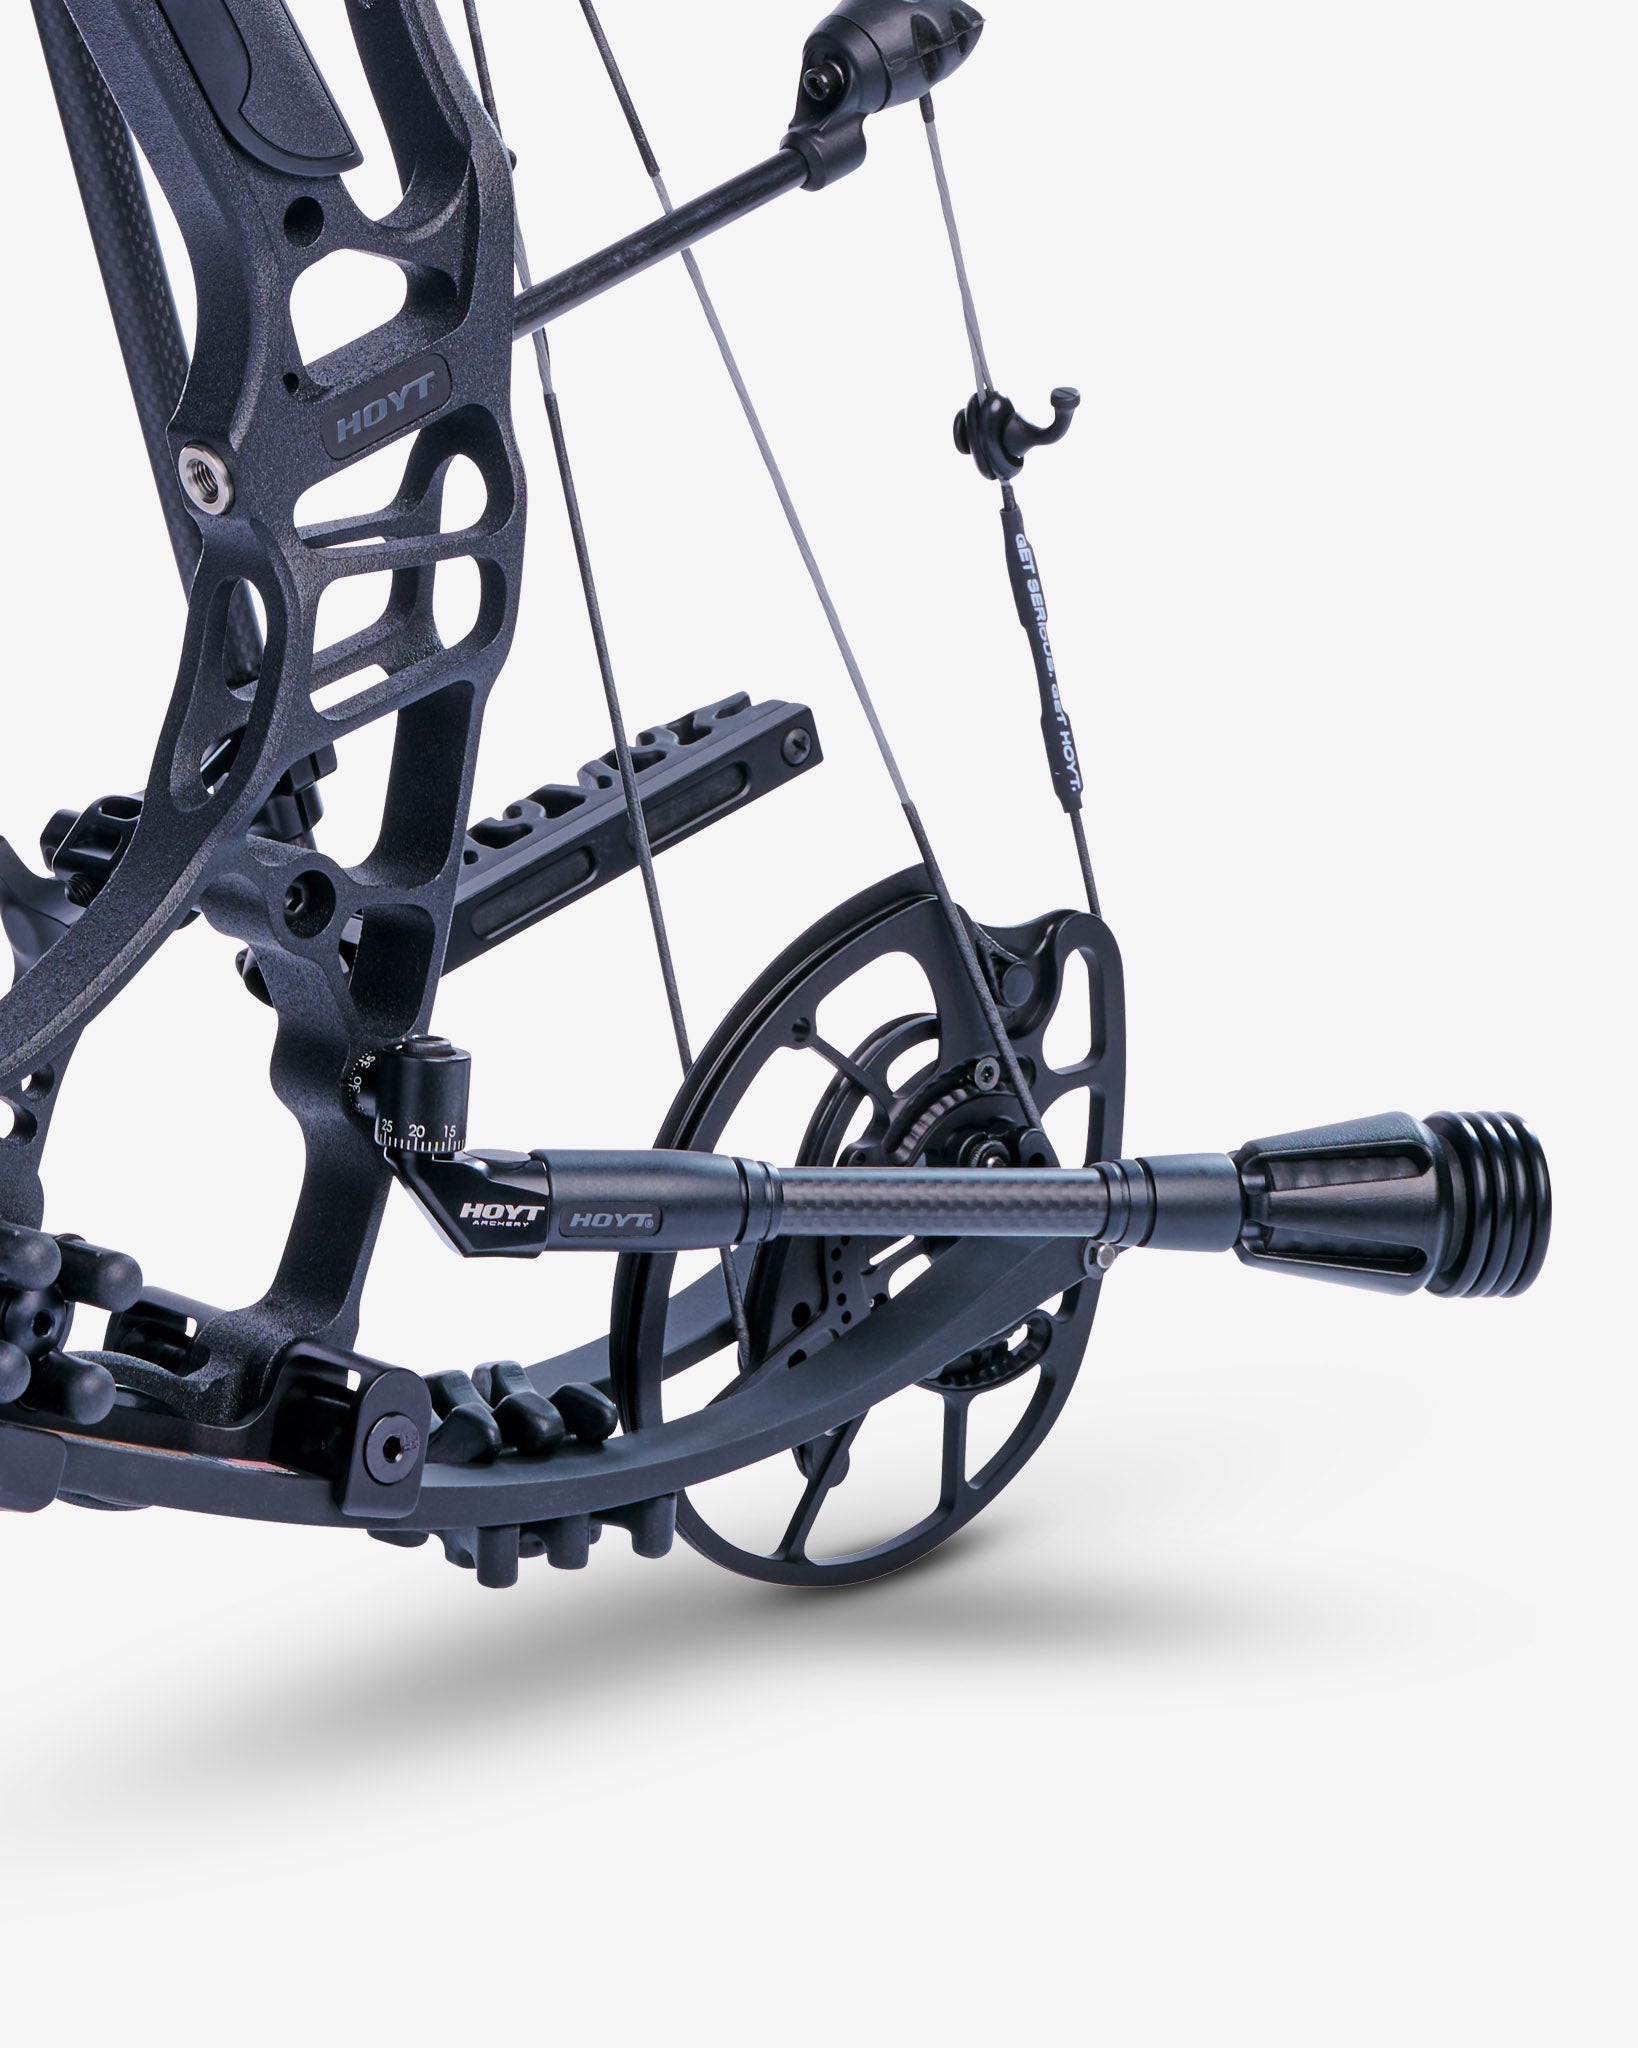 Pro Series Stabilizers